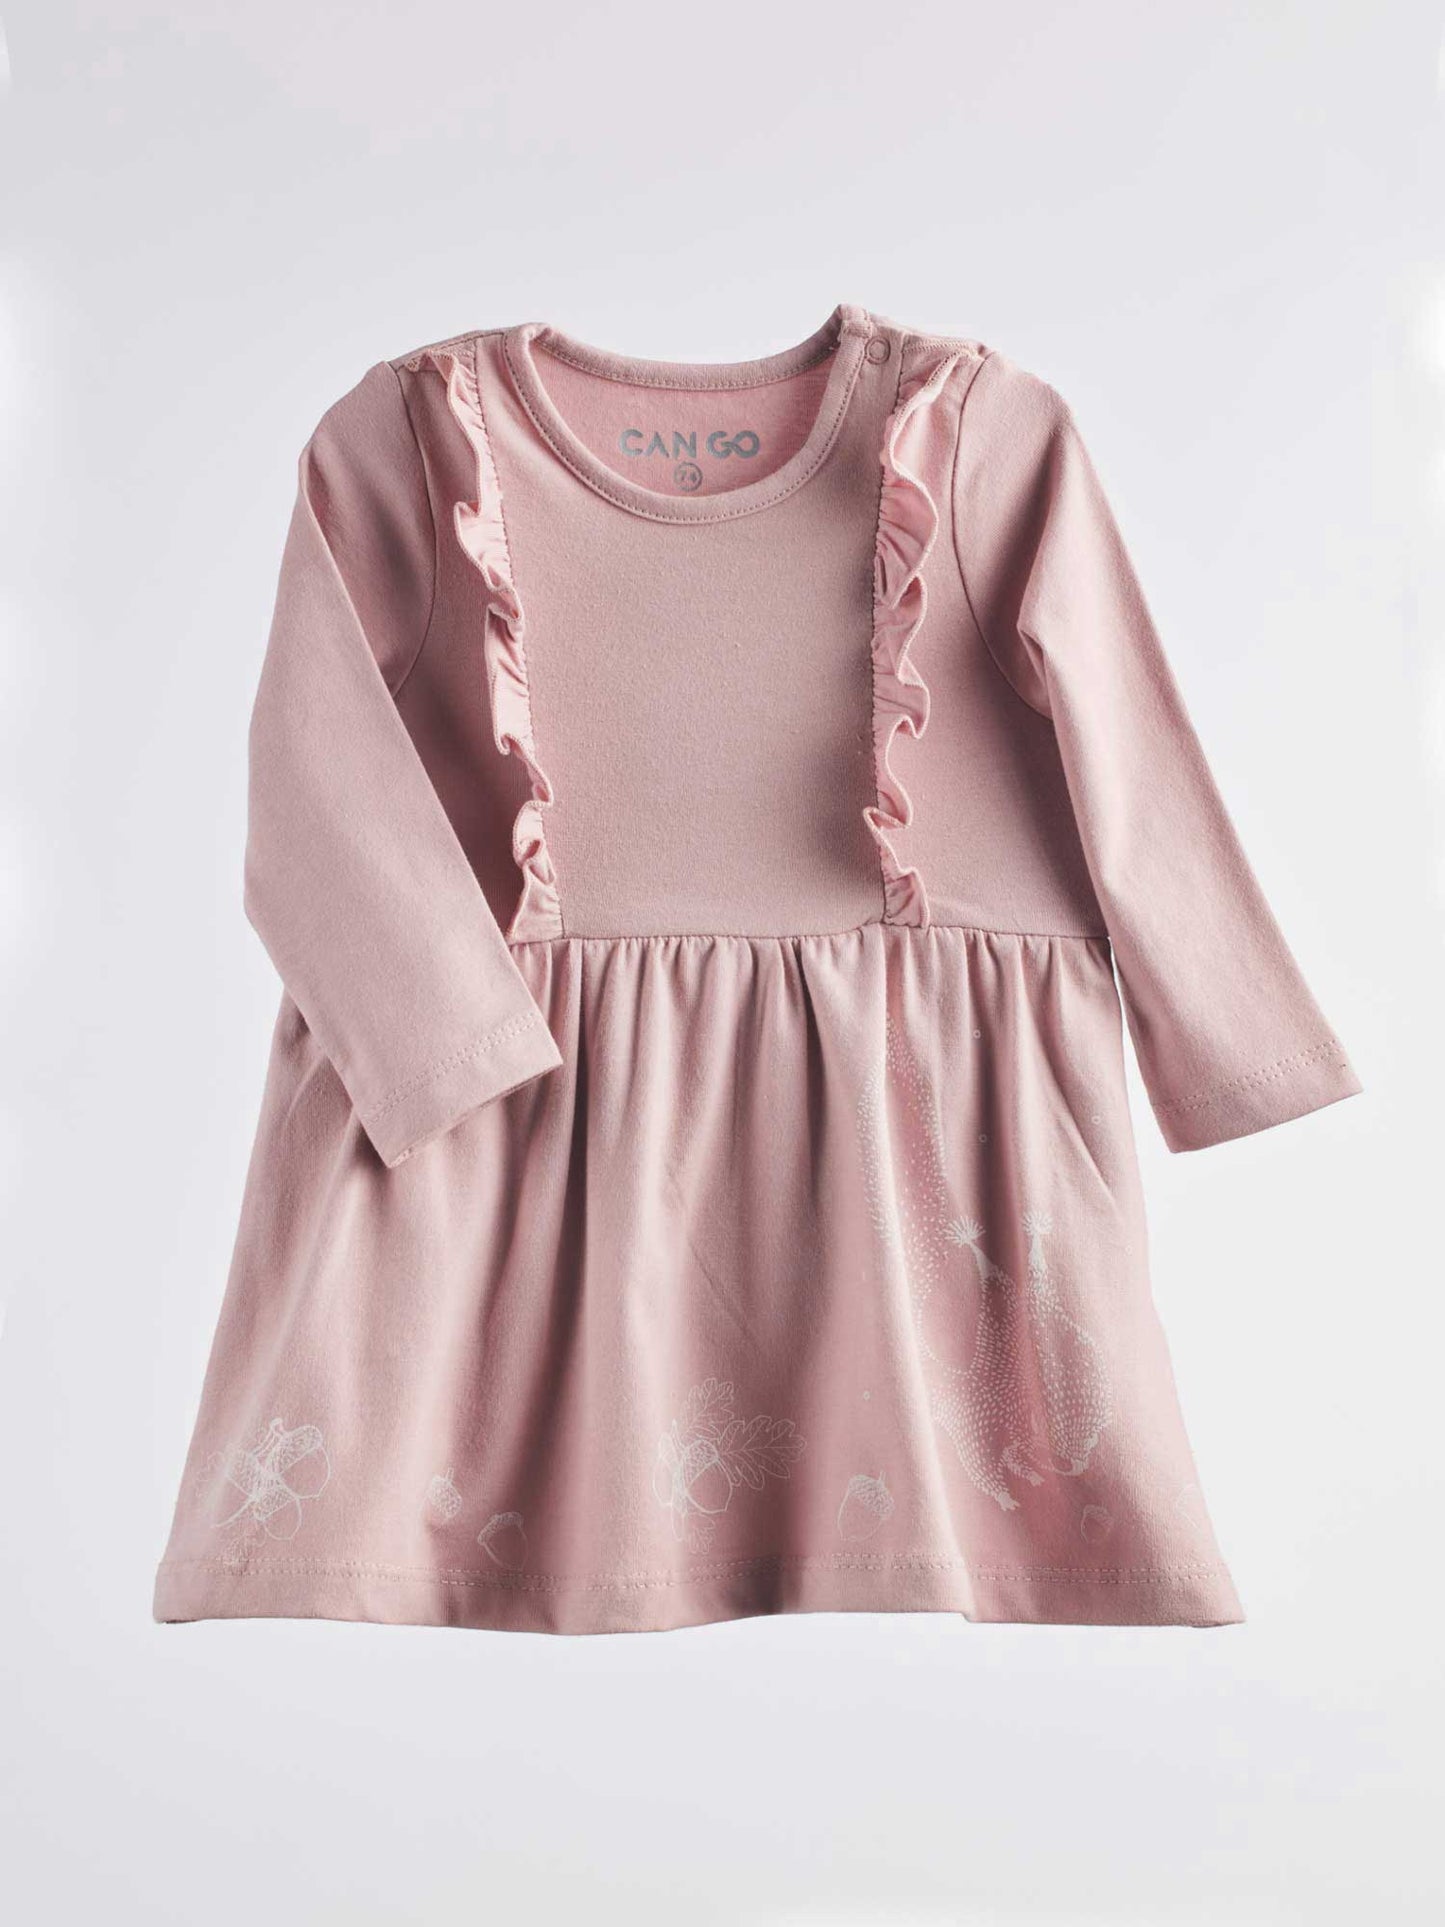 The Baby Dress Squirrel 360 mid-length dress is suitable for any occasion and features a soft, cotton material that is gentle on sensitive skin, along with an inner fuzz lining to provide extra warmth and coziness. Keep your baby snug in style!